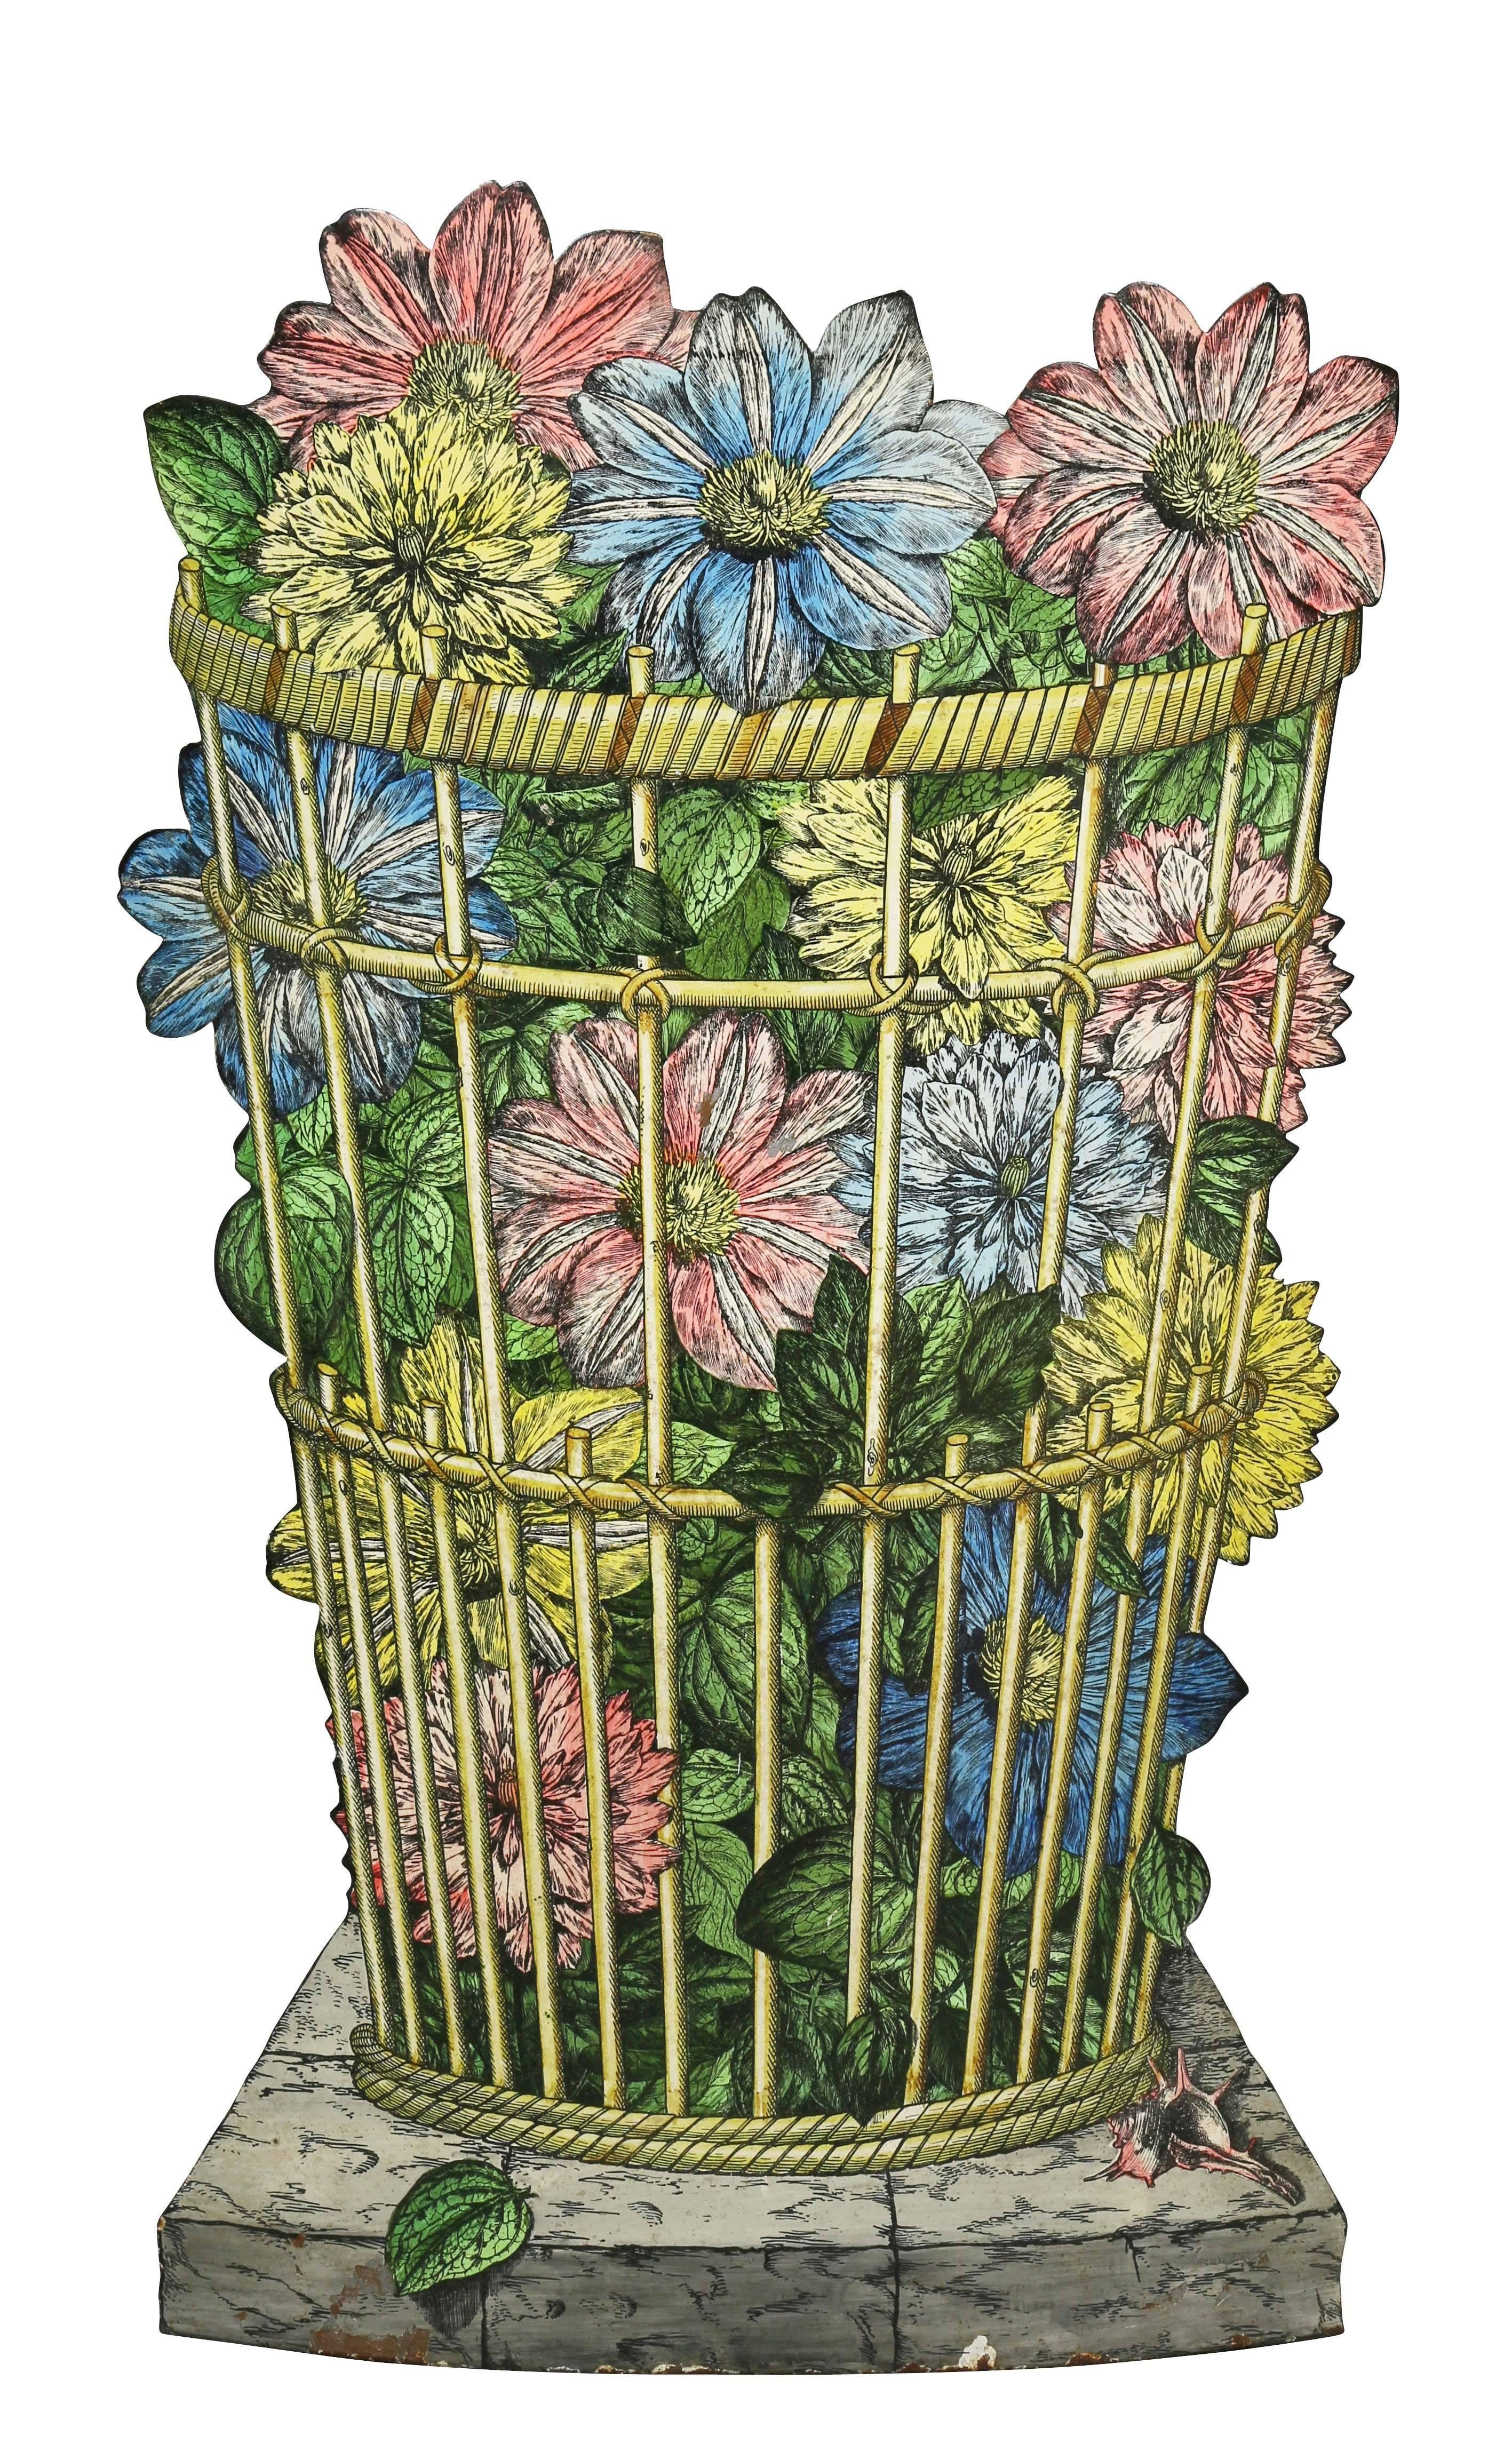 Faux painted depicting a basket of flowers.